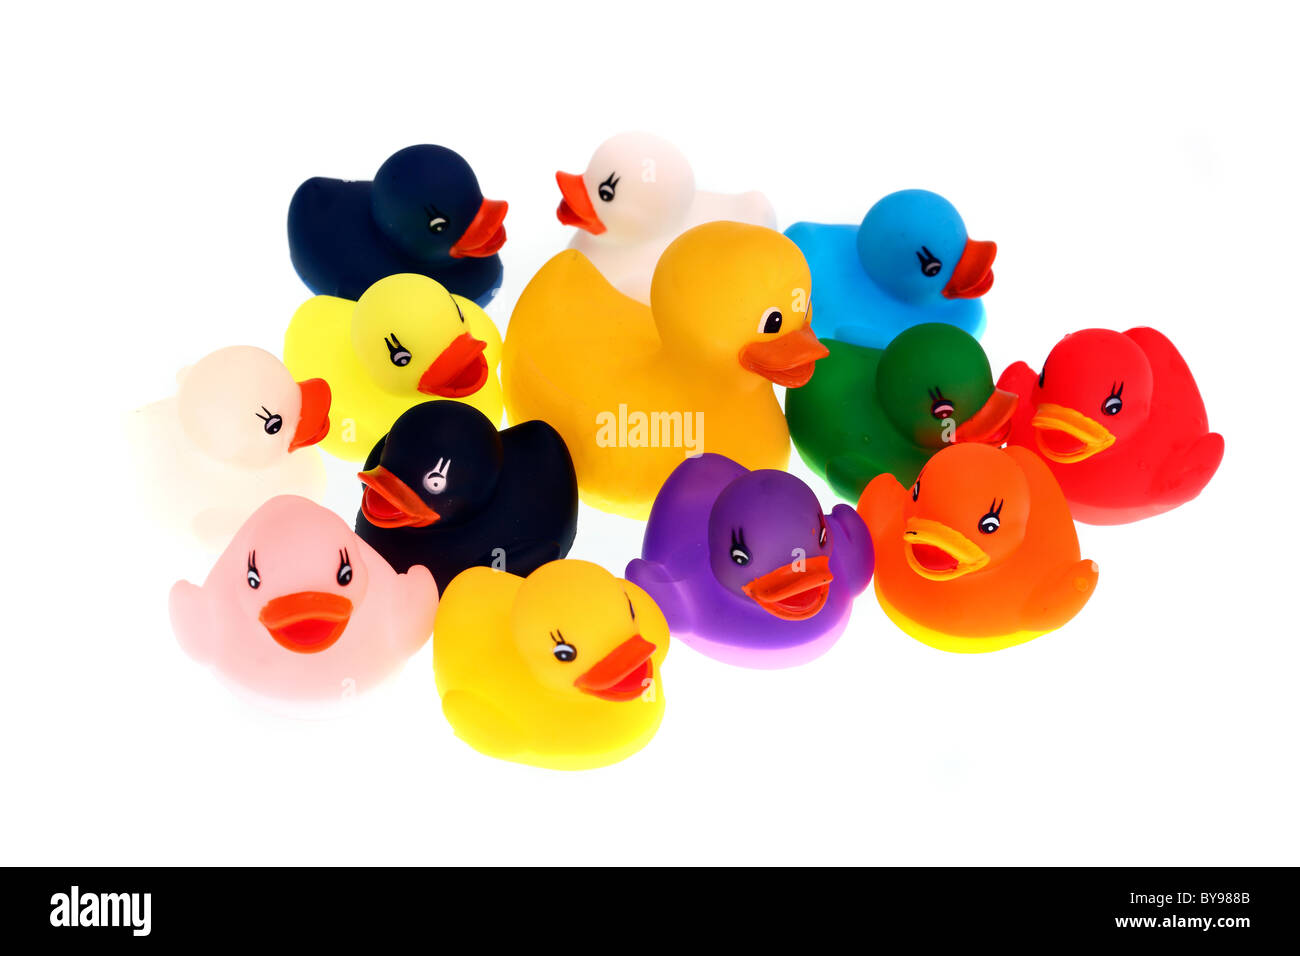 Bath toys, different colorful figures for kids to play with in a pool or bath tub. Wind-up figures, mechanic. Stock Photo